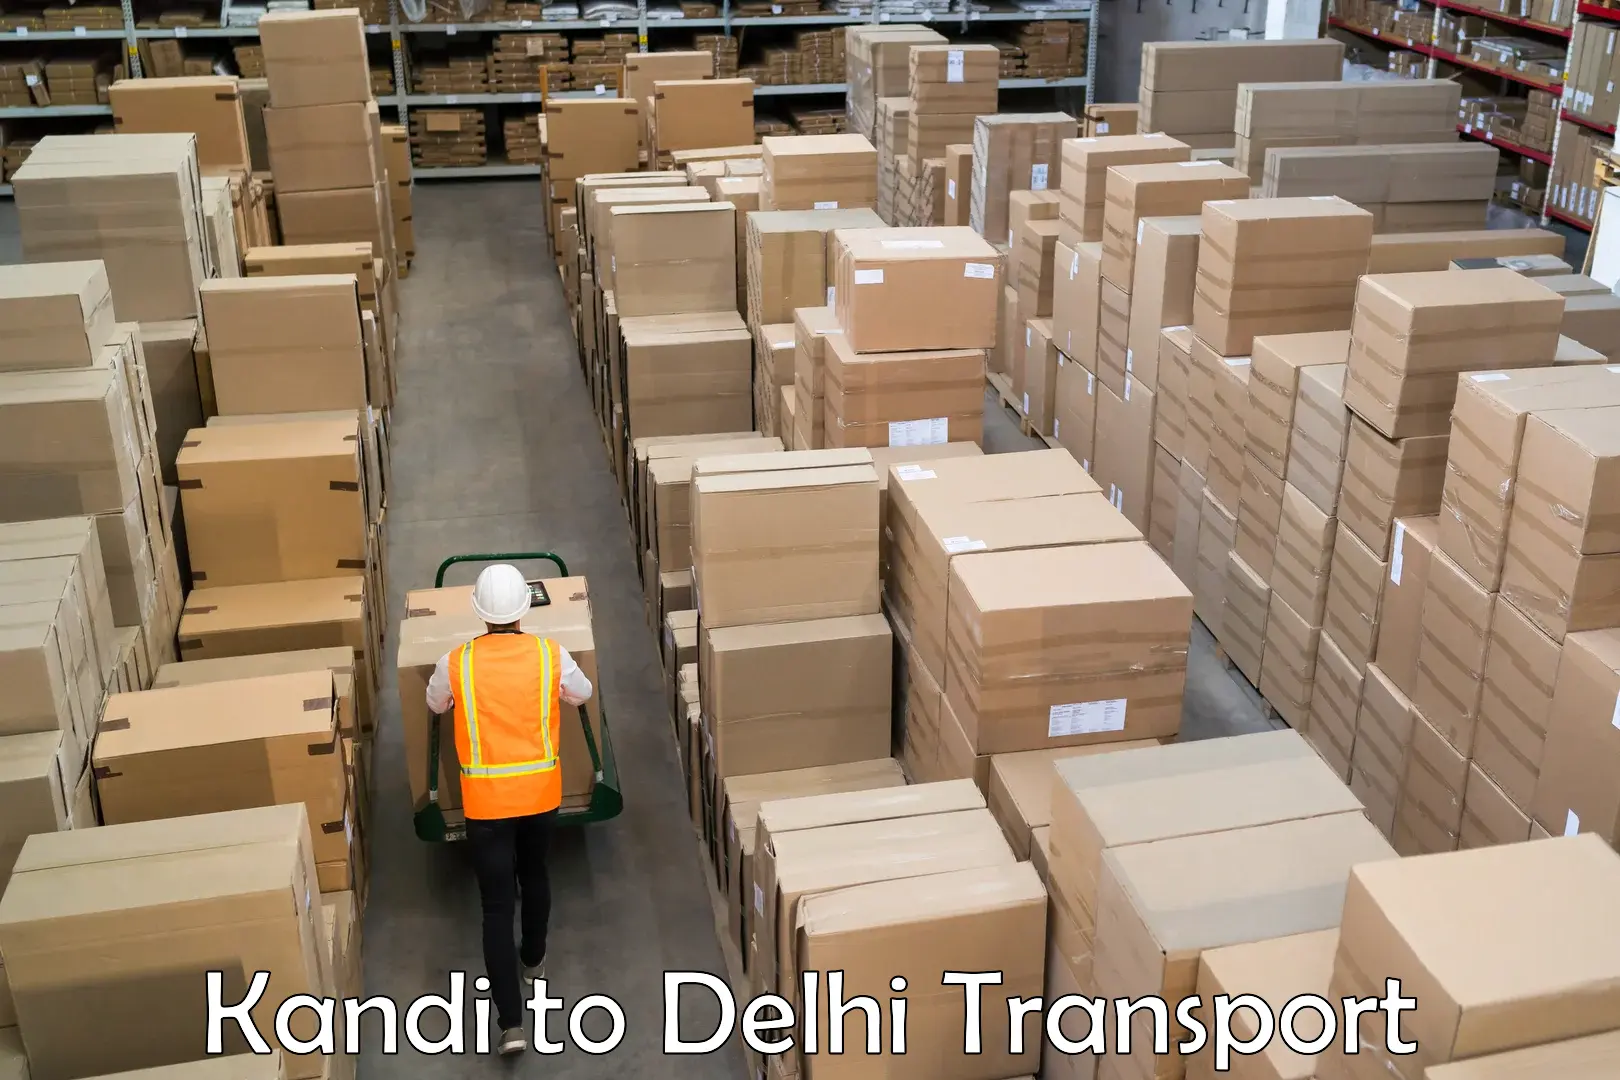 Shipping services Kandi to Lodhi Road